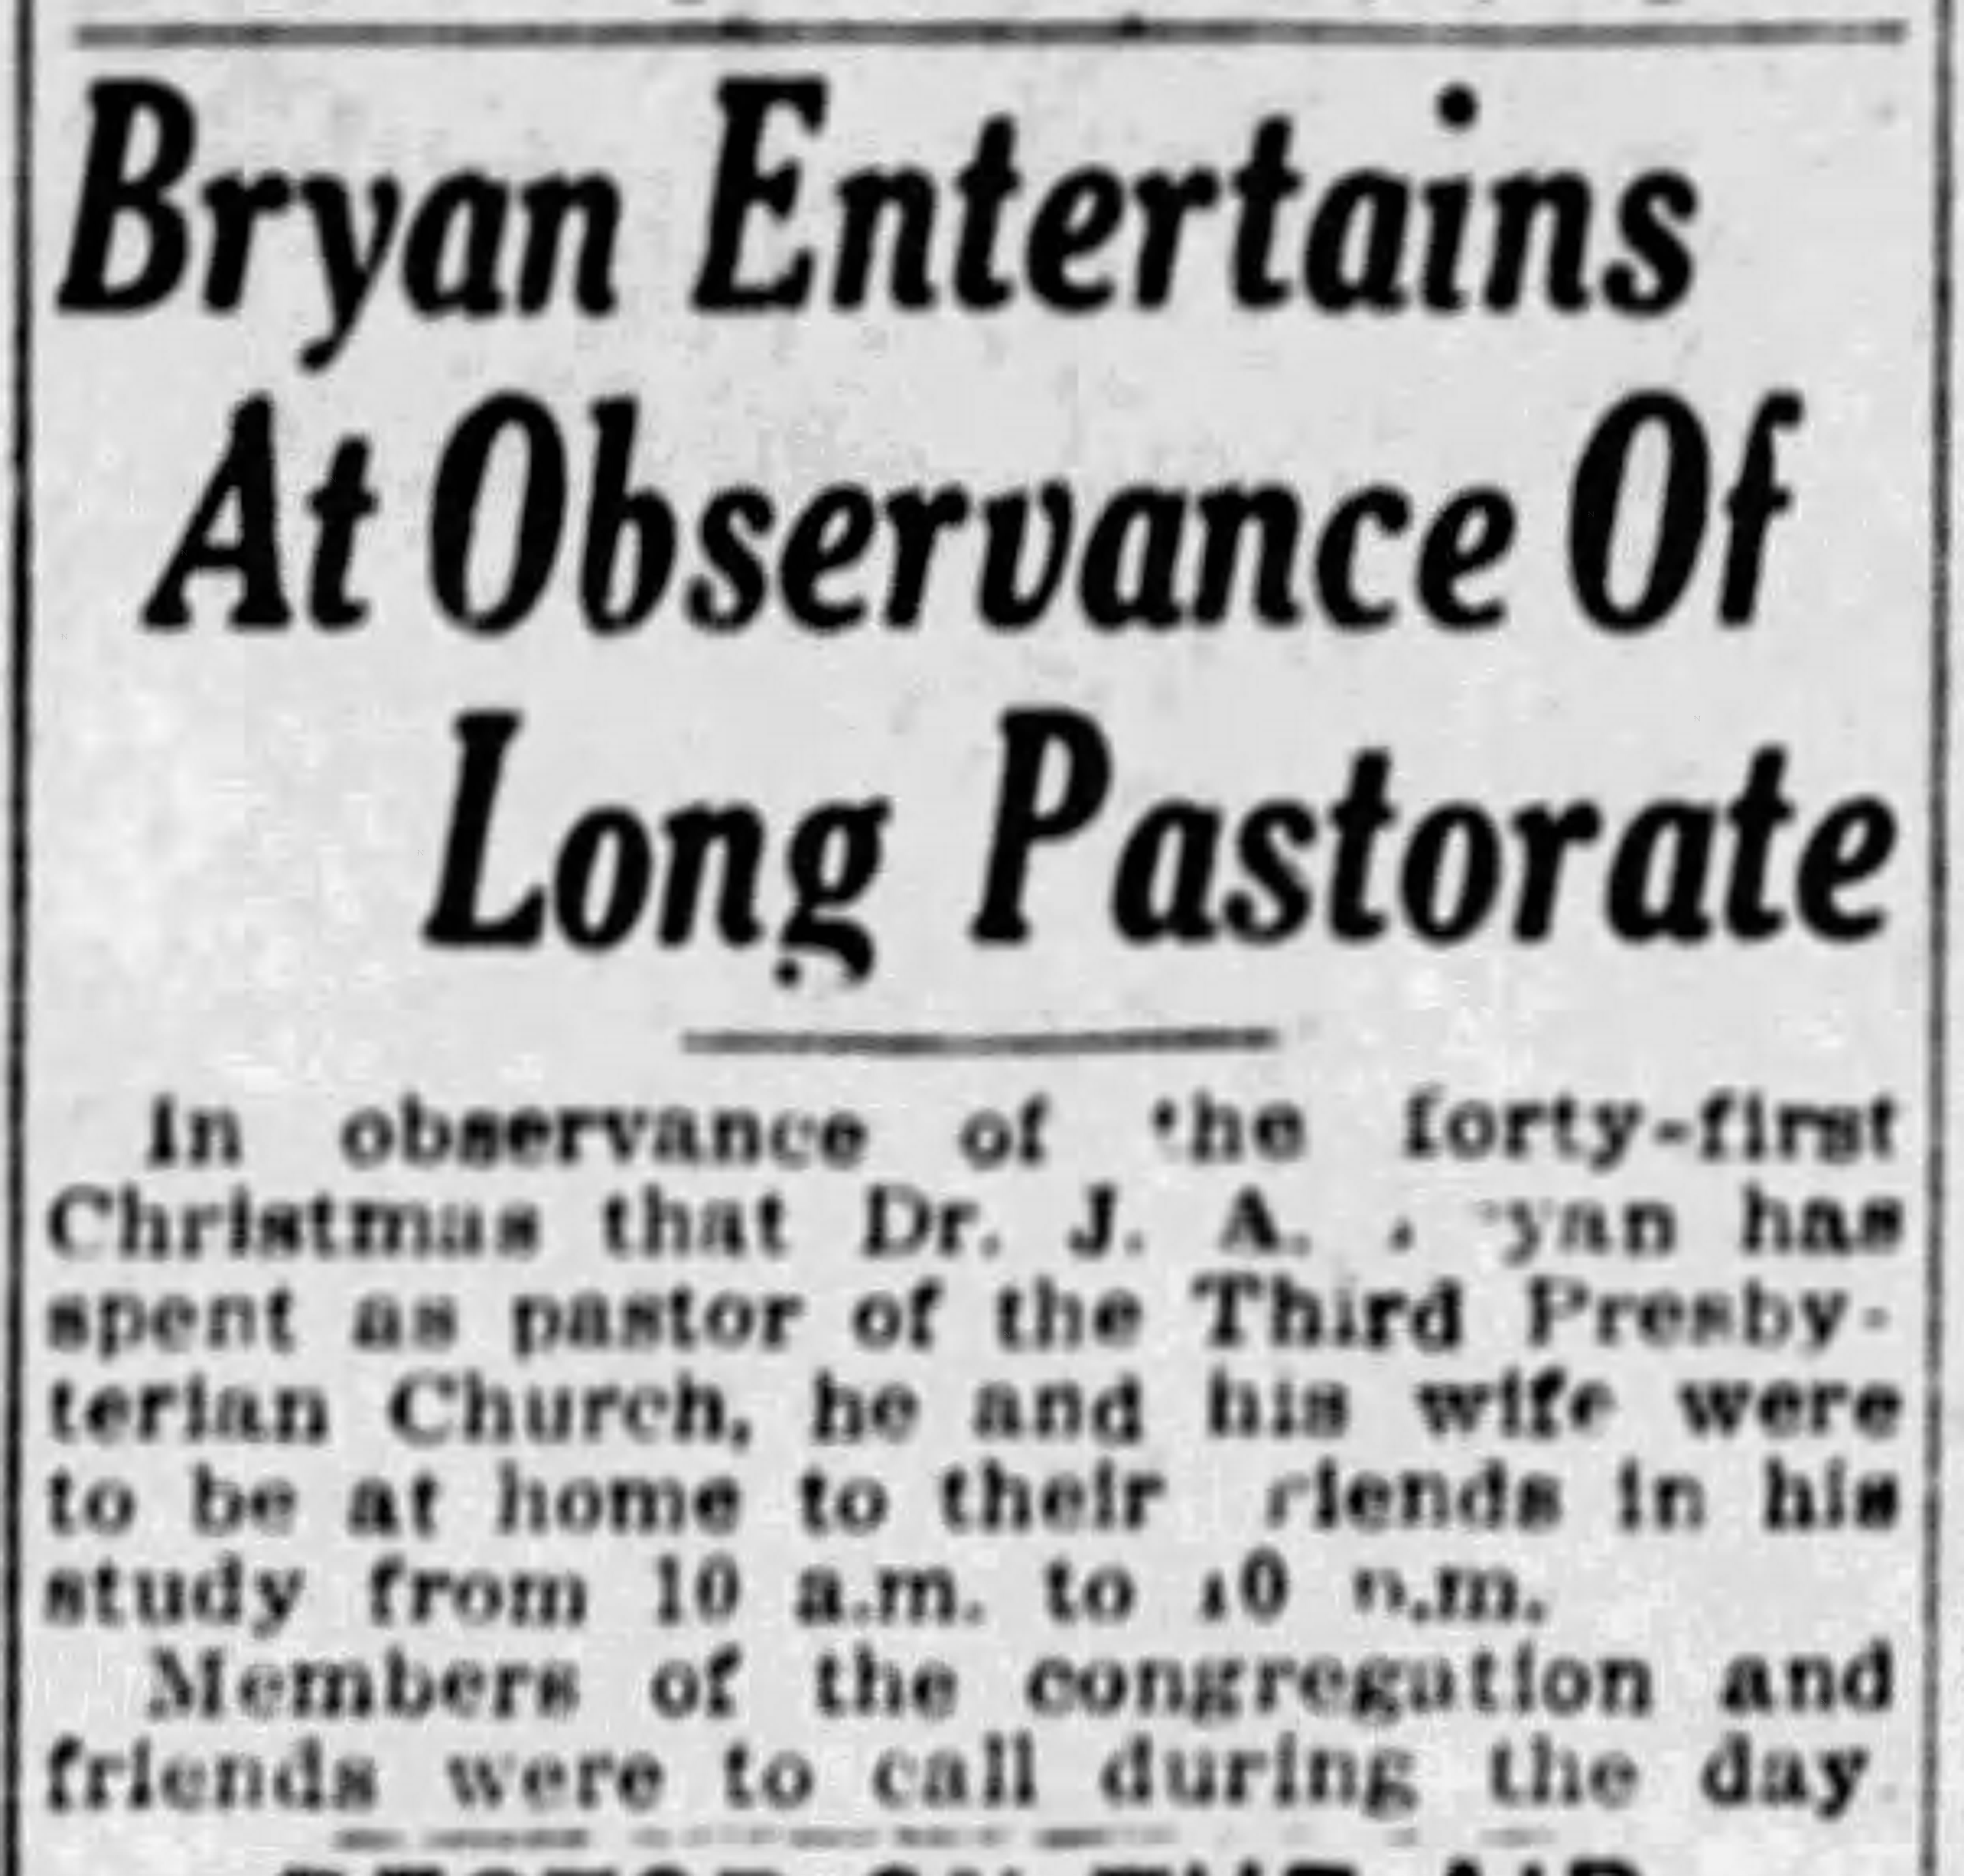 Bryan Entertains At Observance of Long Pastorate